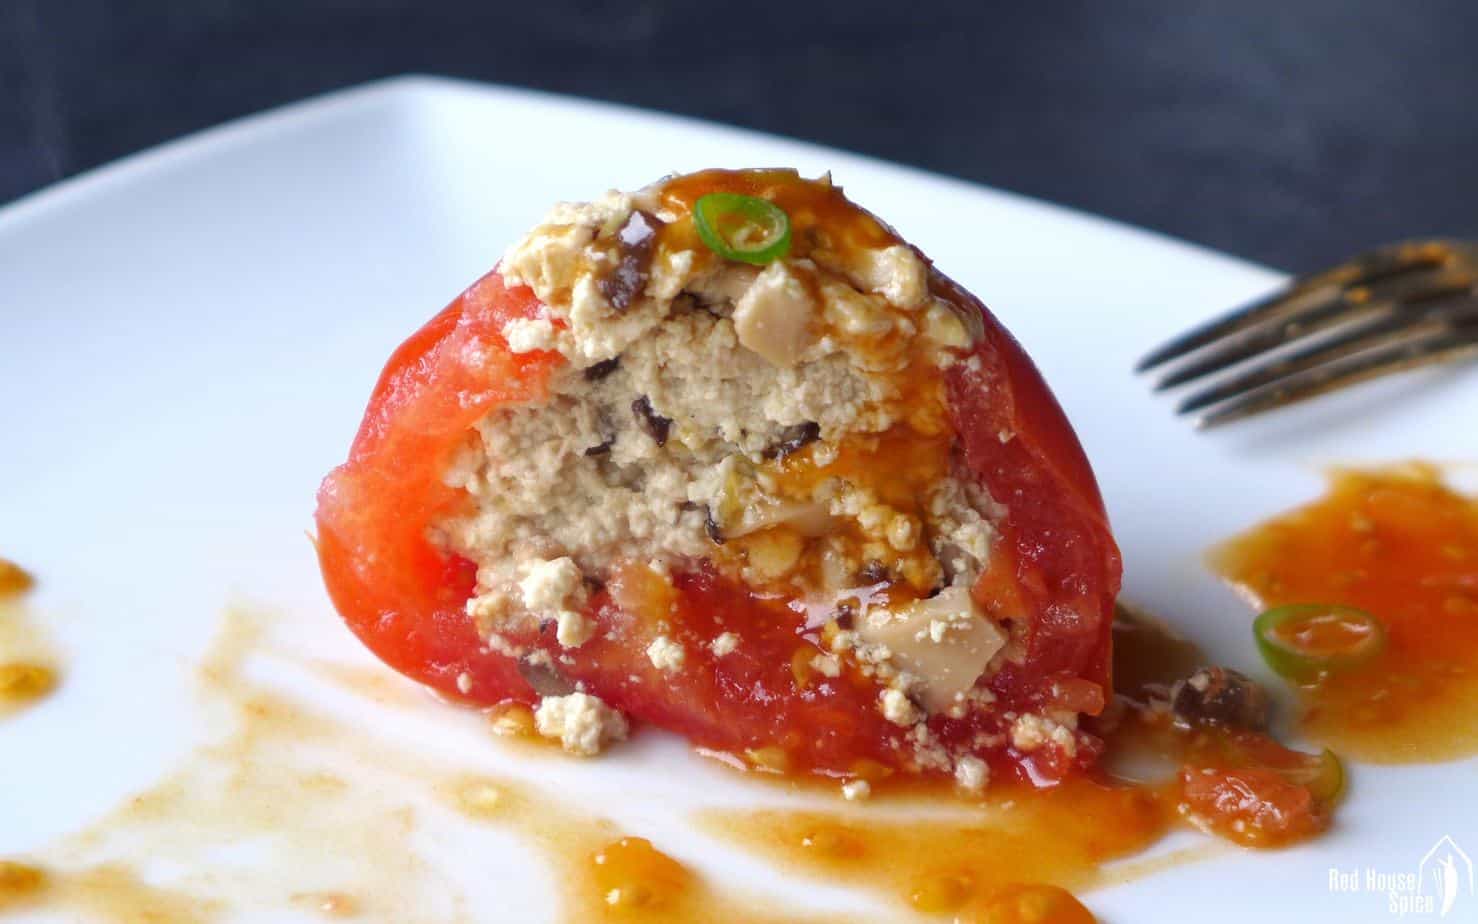 Juicy tomatoes are hollowed and steamed with well seasoned tofu crumbs, then served with a sweet and sour sauce made from the pulp of the tomatoes.